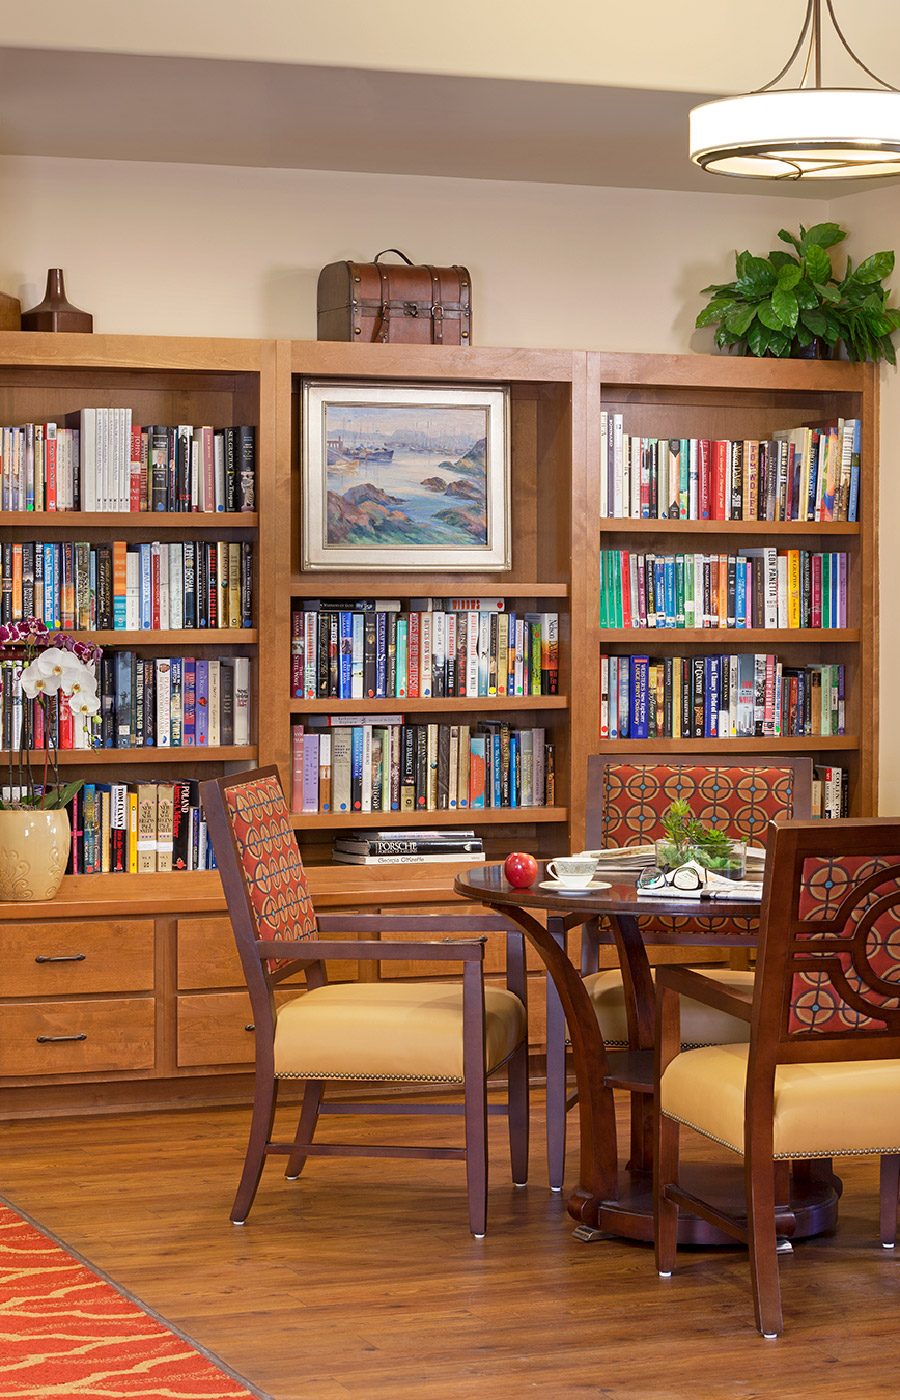 A large bookshelf area with a dining table